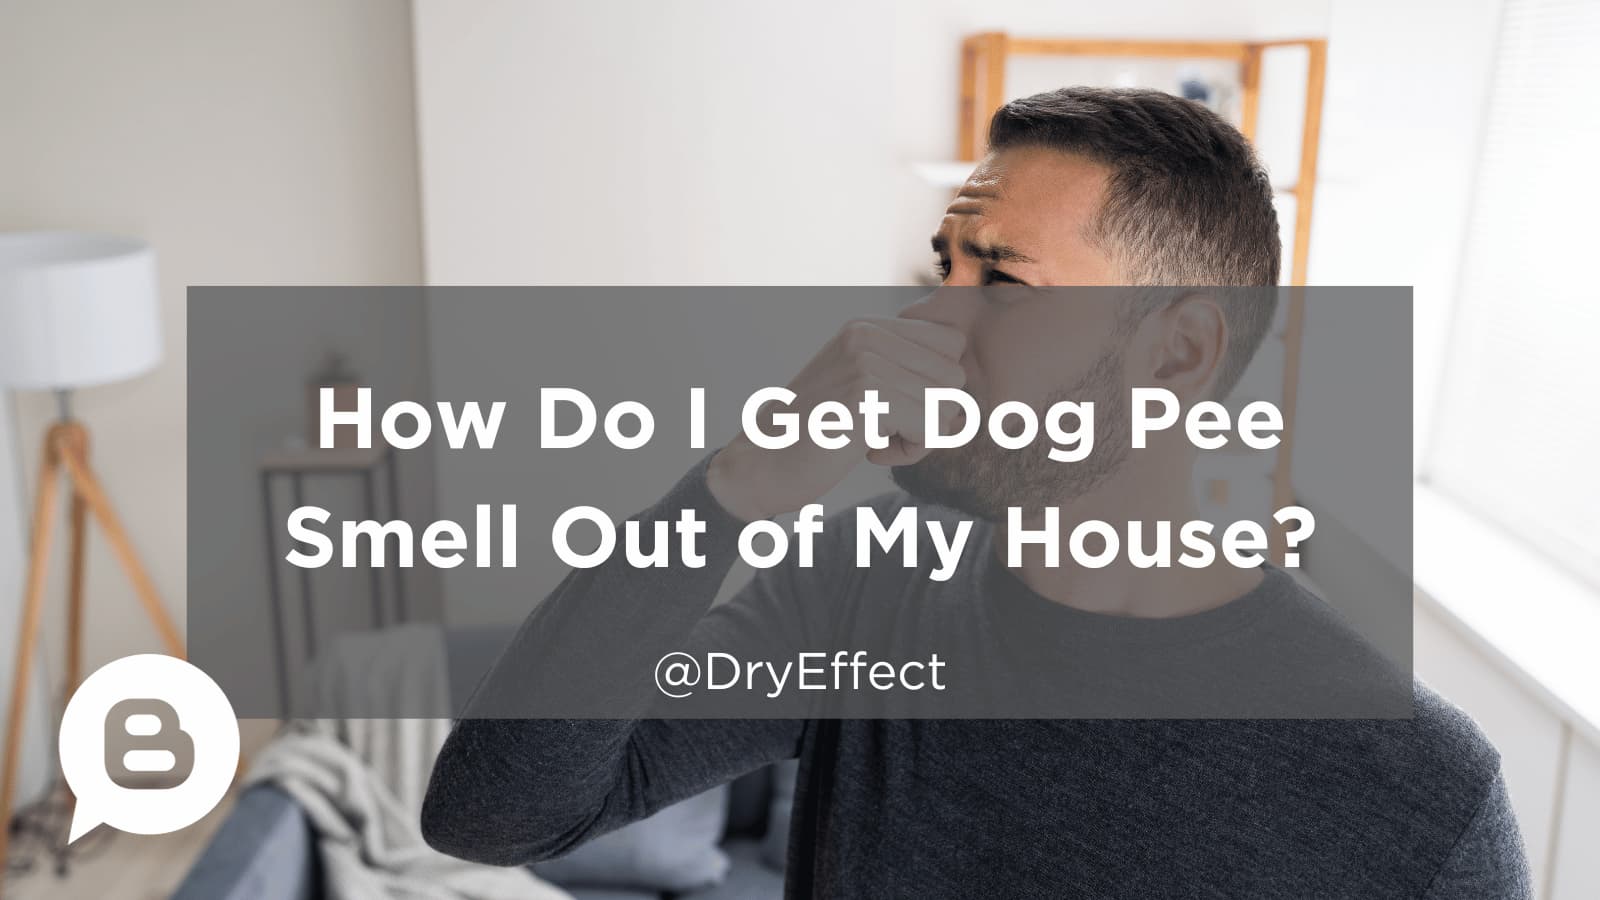 How Do I Get Dog Pee Smell Out of My House